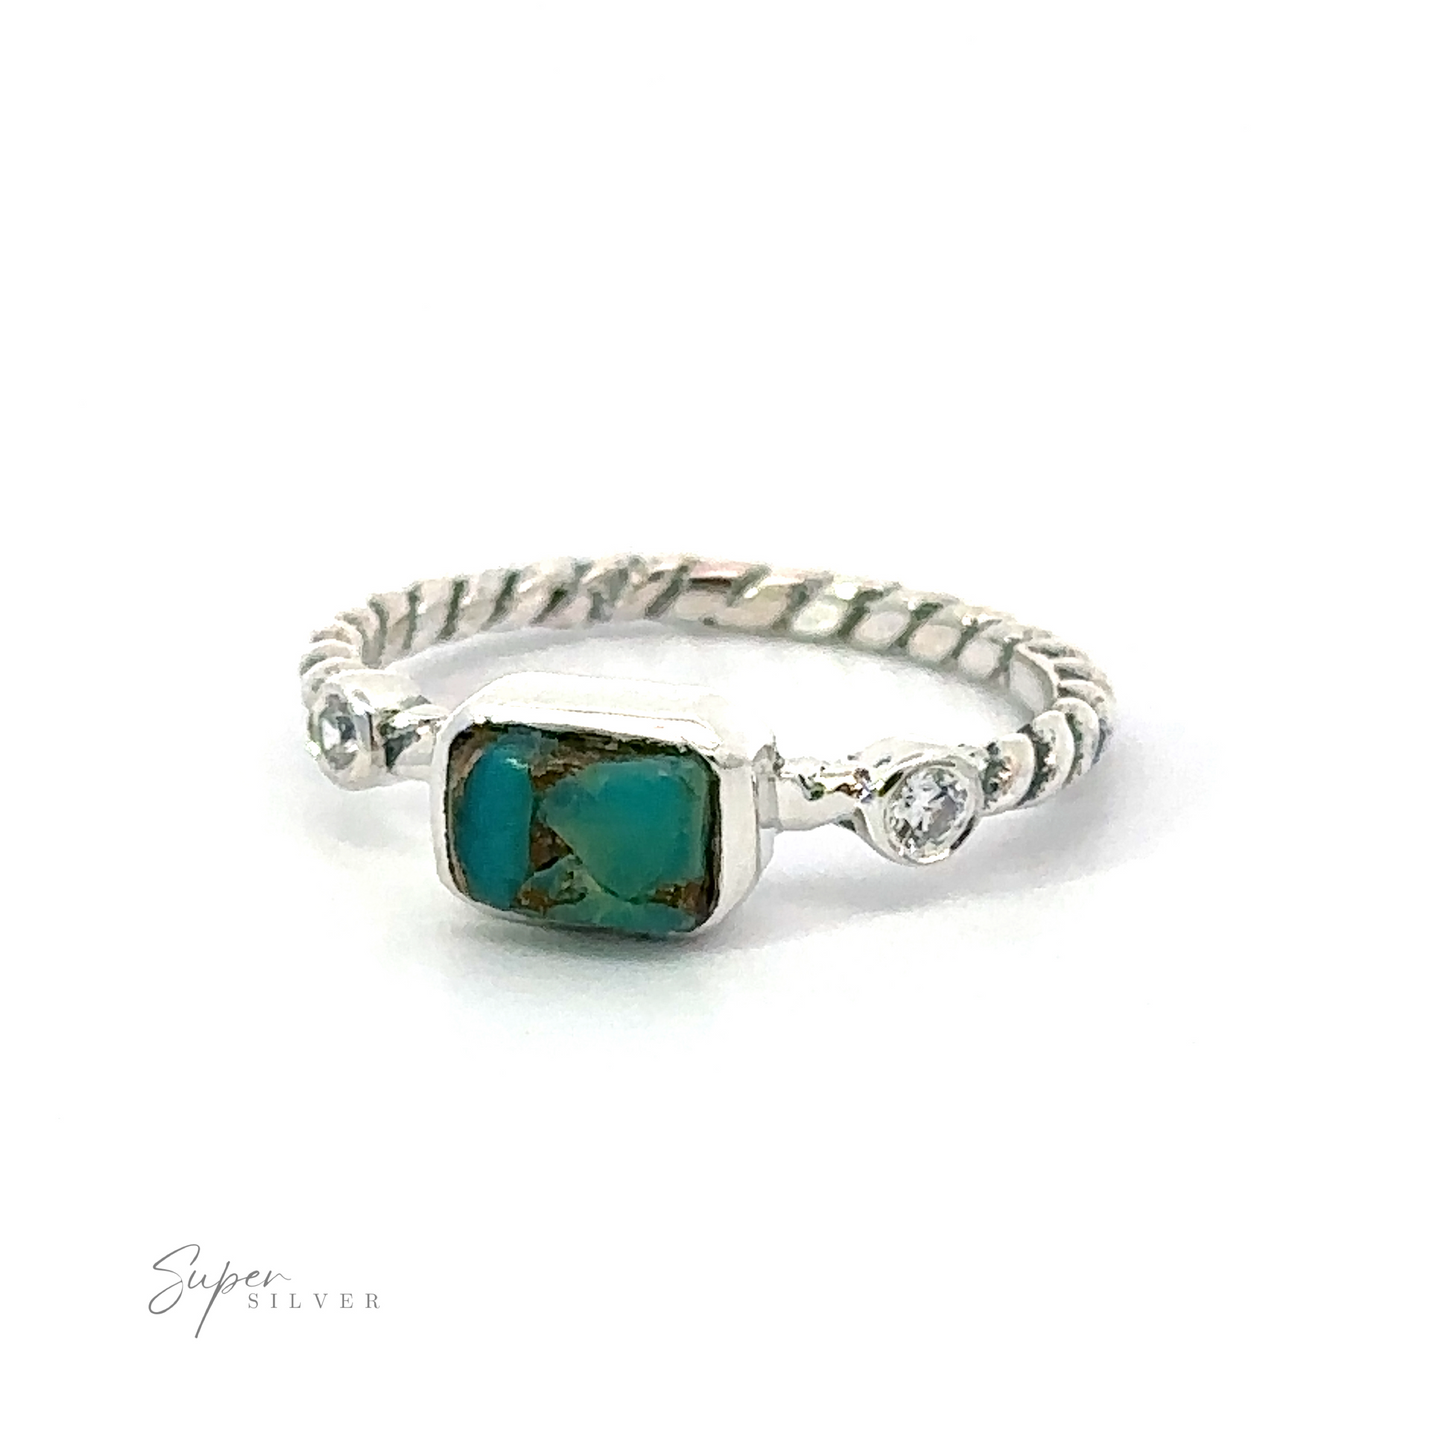 
                  
                    Sterling silver "Rectangle Gemstone Ring with Twisted Band" featuring a rectangle turquoise gemstone and a small clear gemstone, set on a twisted band with vintage charm, photographed against a white background.
                  
                